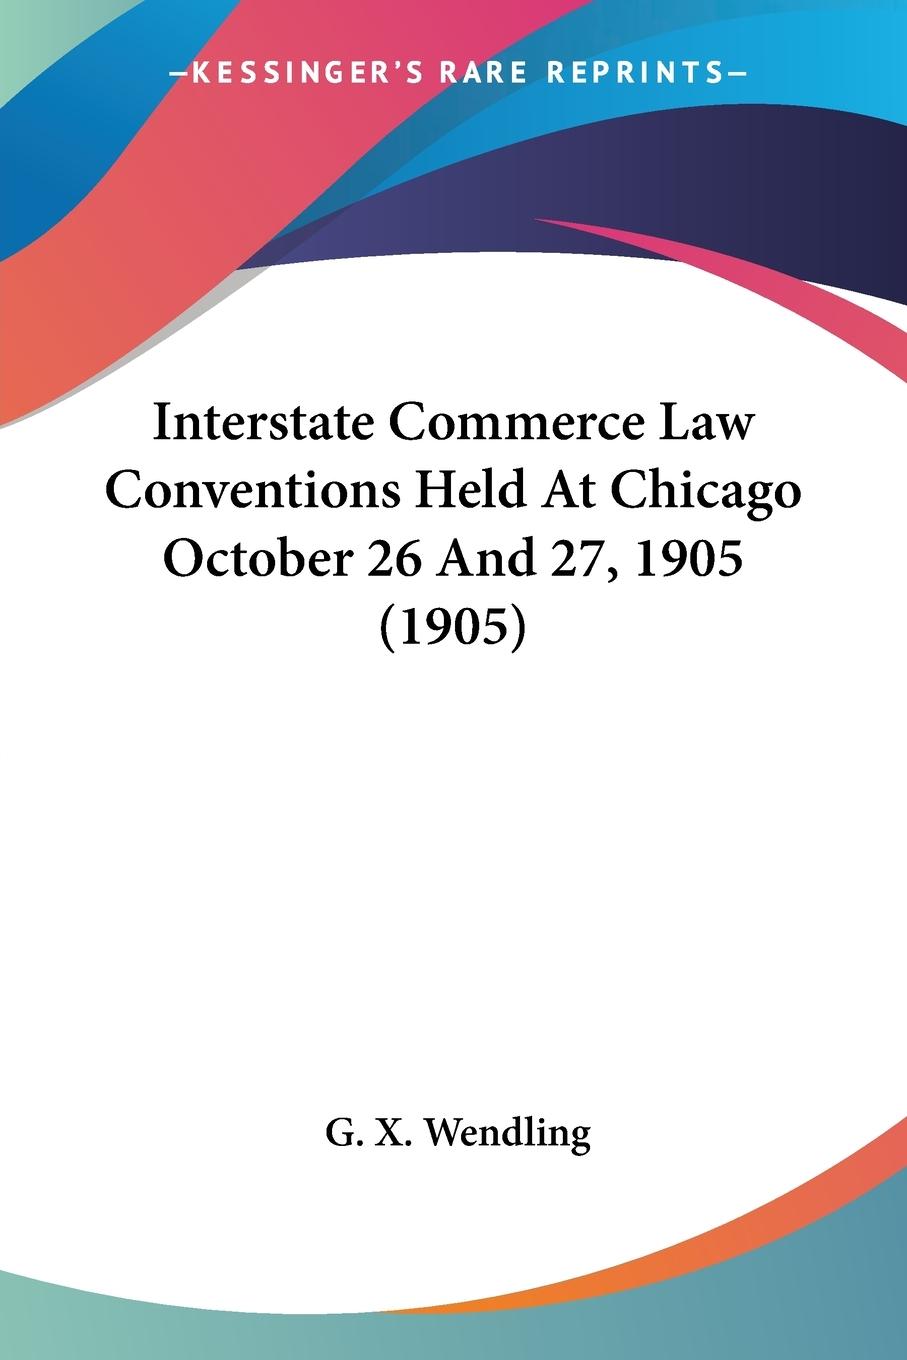 Interstate Commerce Law Conventions Held At Chicago October 26 And 27, 1905 (1905) - Wendling, G. X.